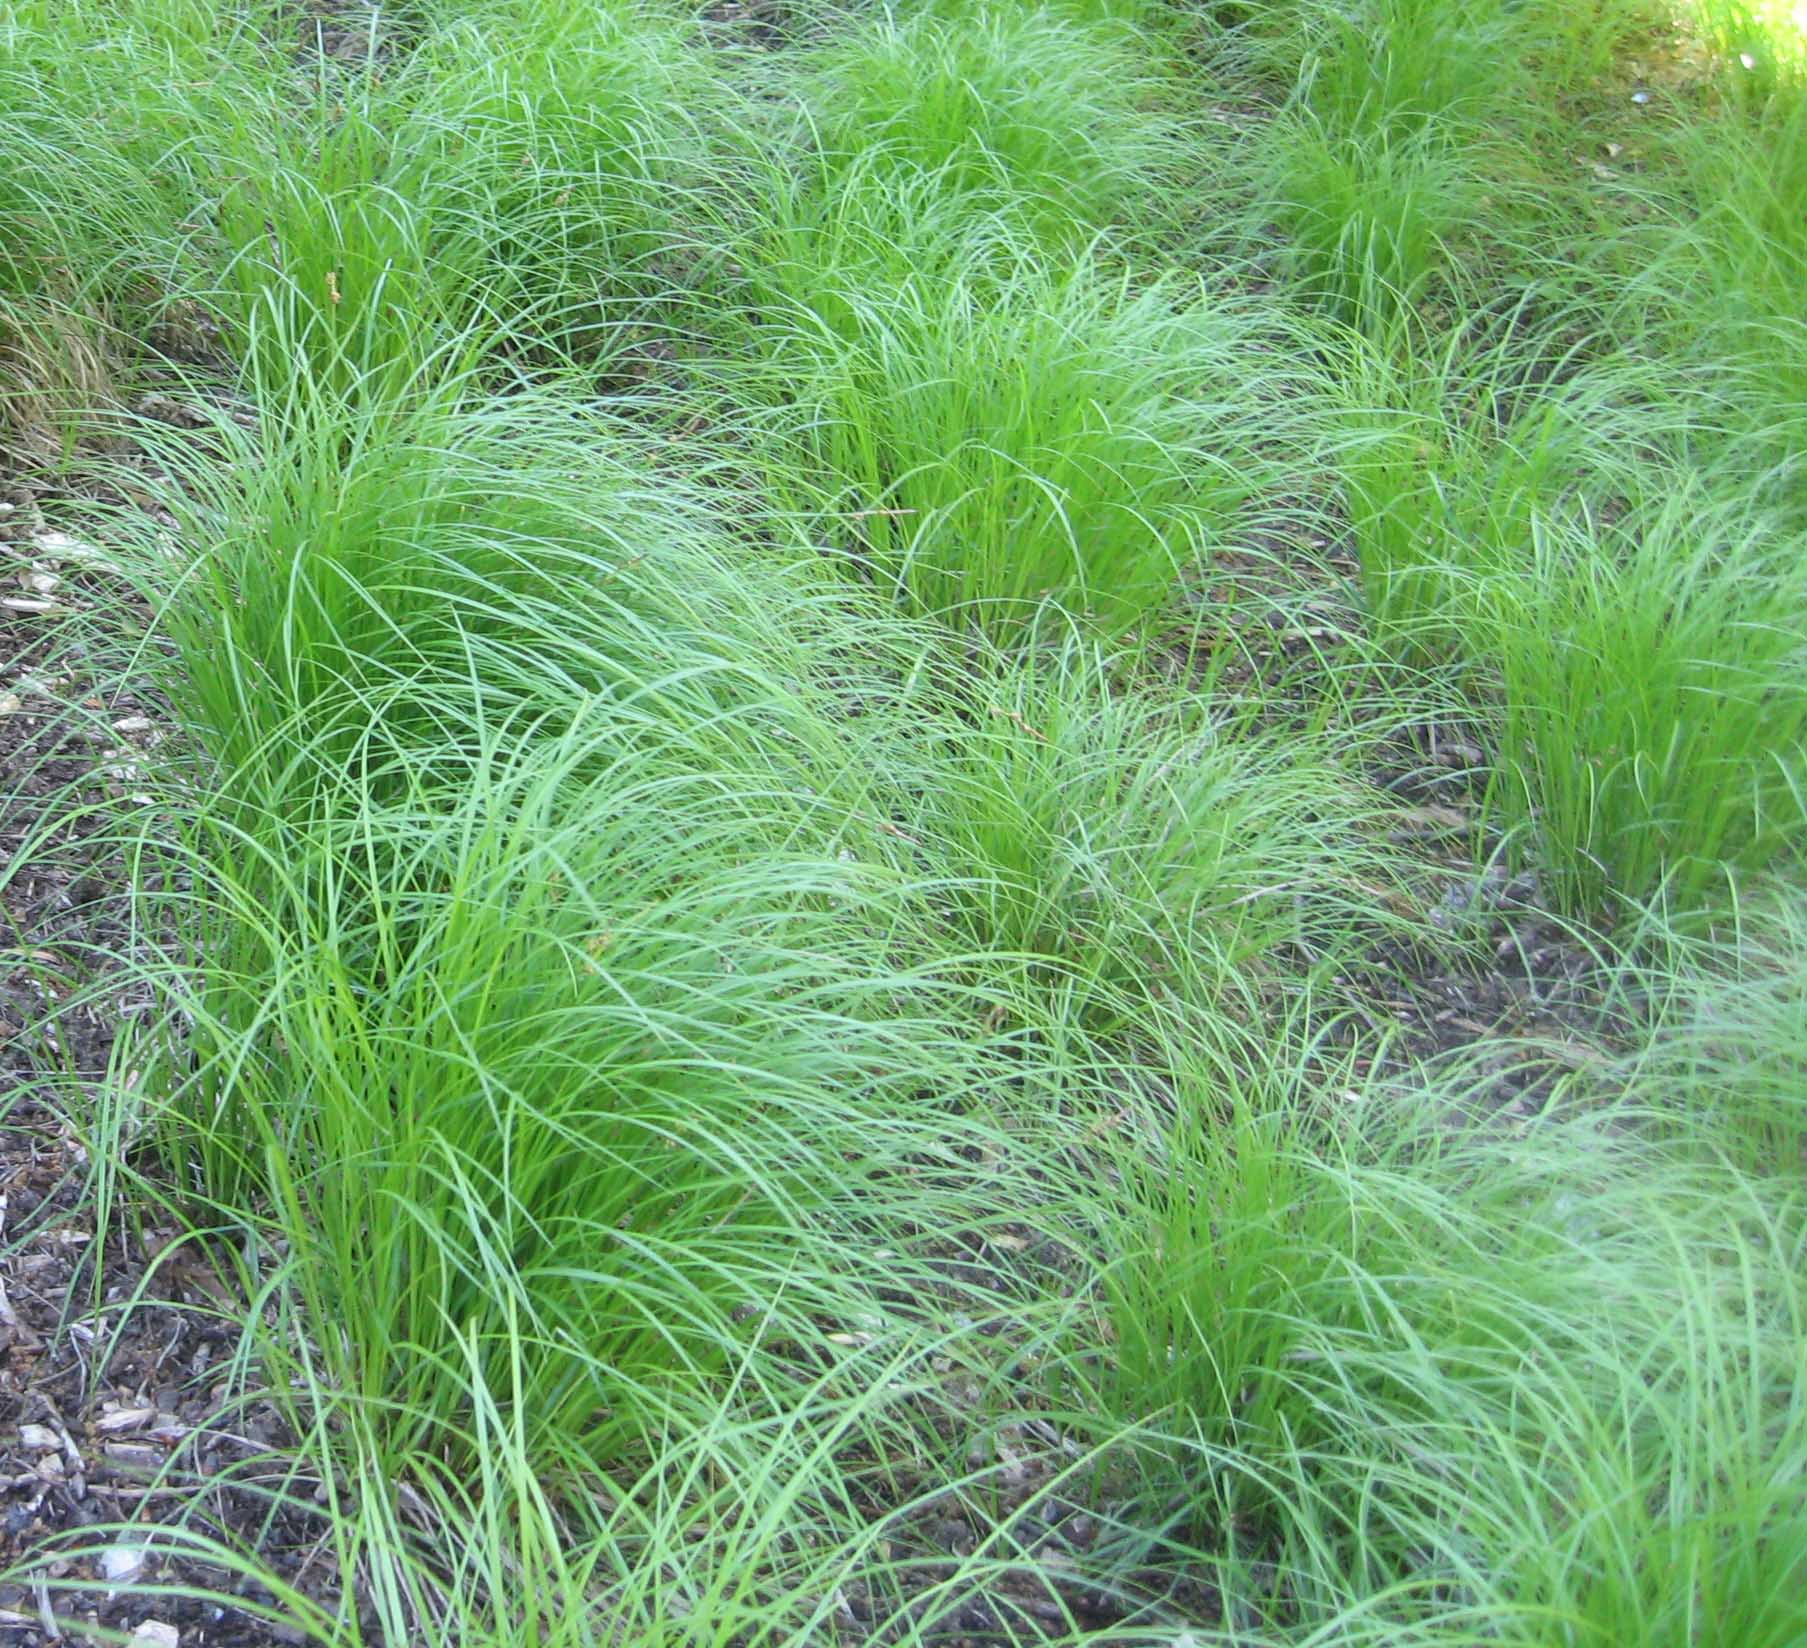 some grass growing on the side of a field